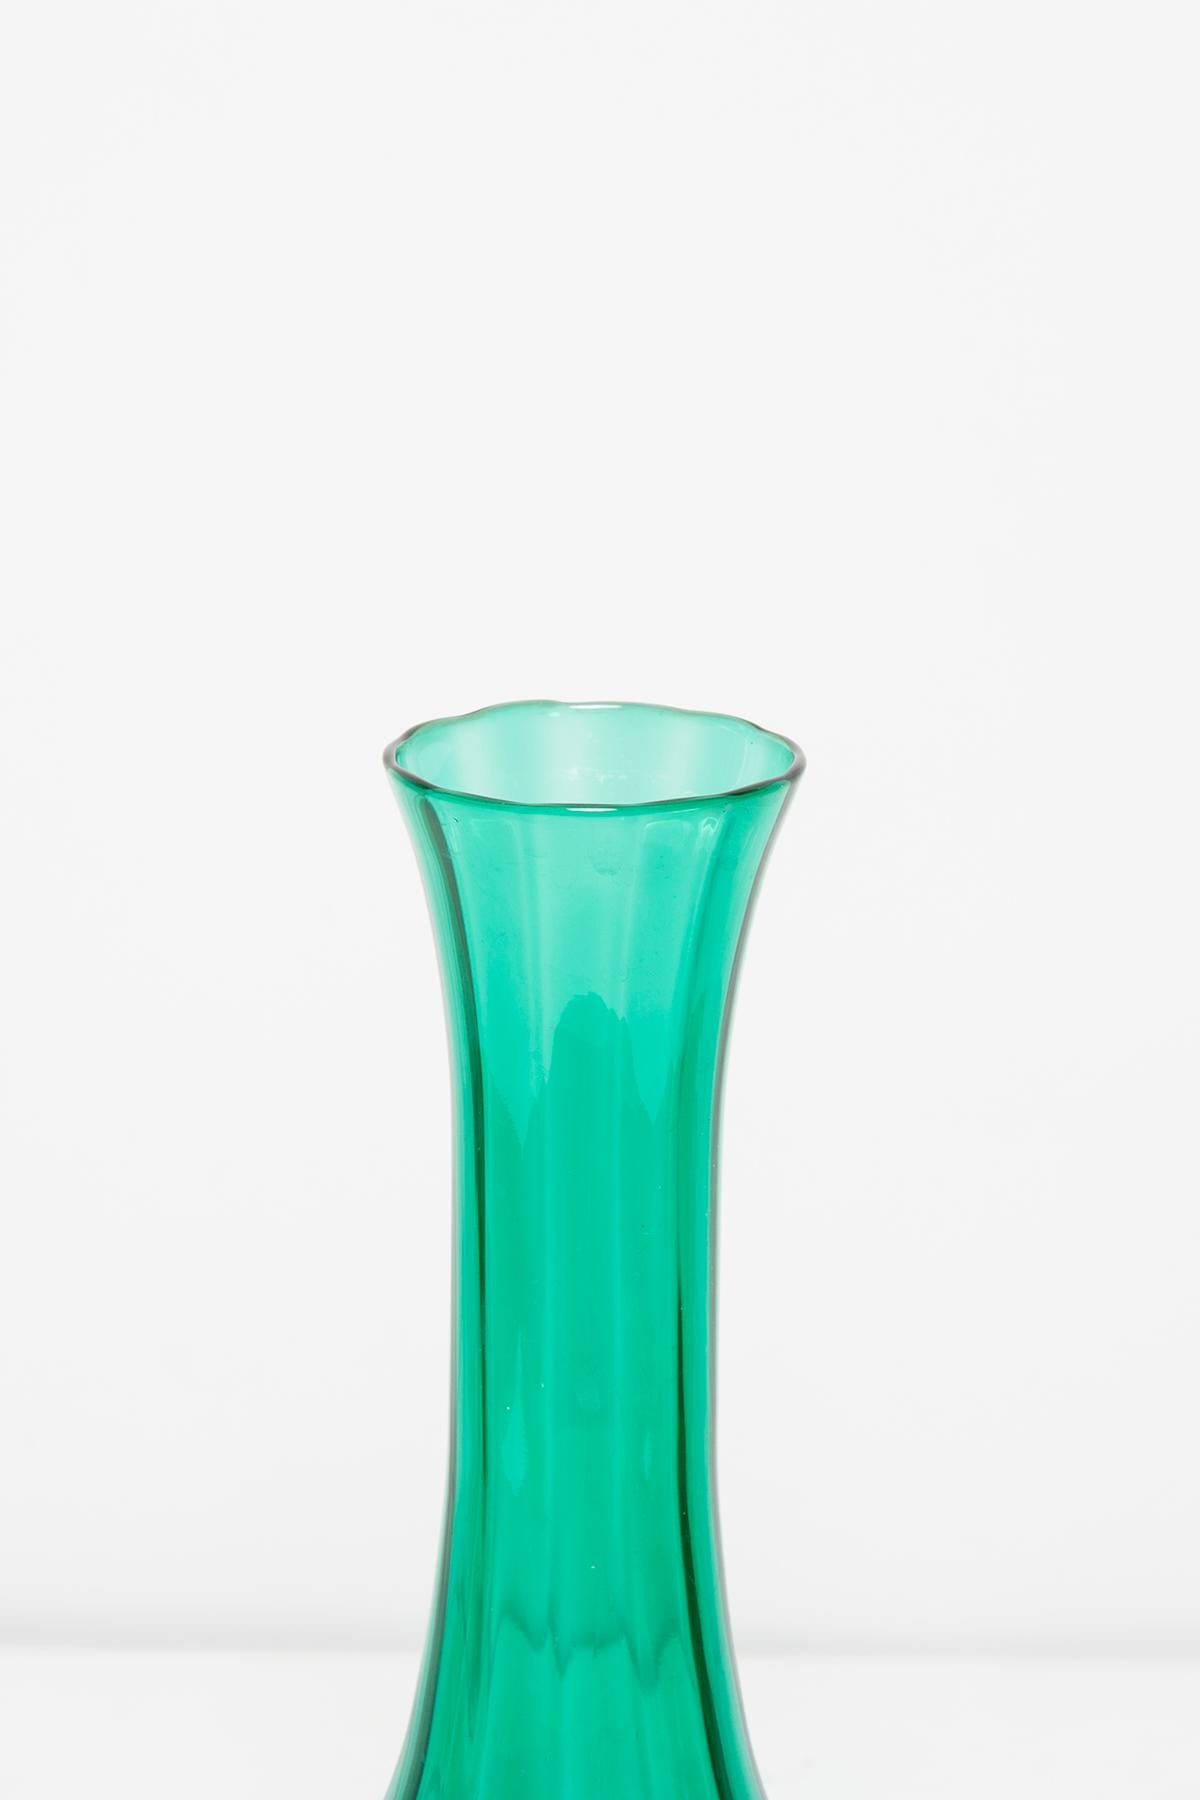 Mid Century Vintage Artistic Glass Green Vase, Europe, 1970s For Sale 1